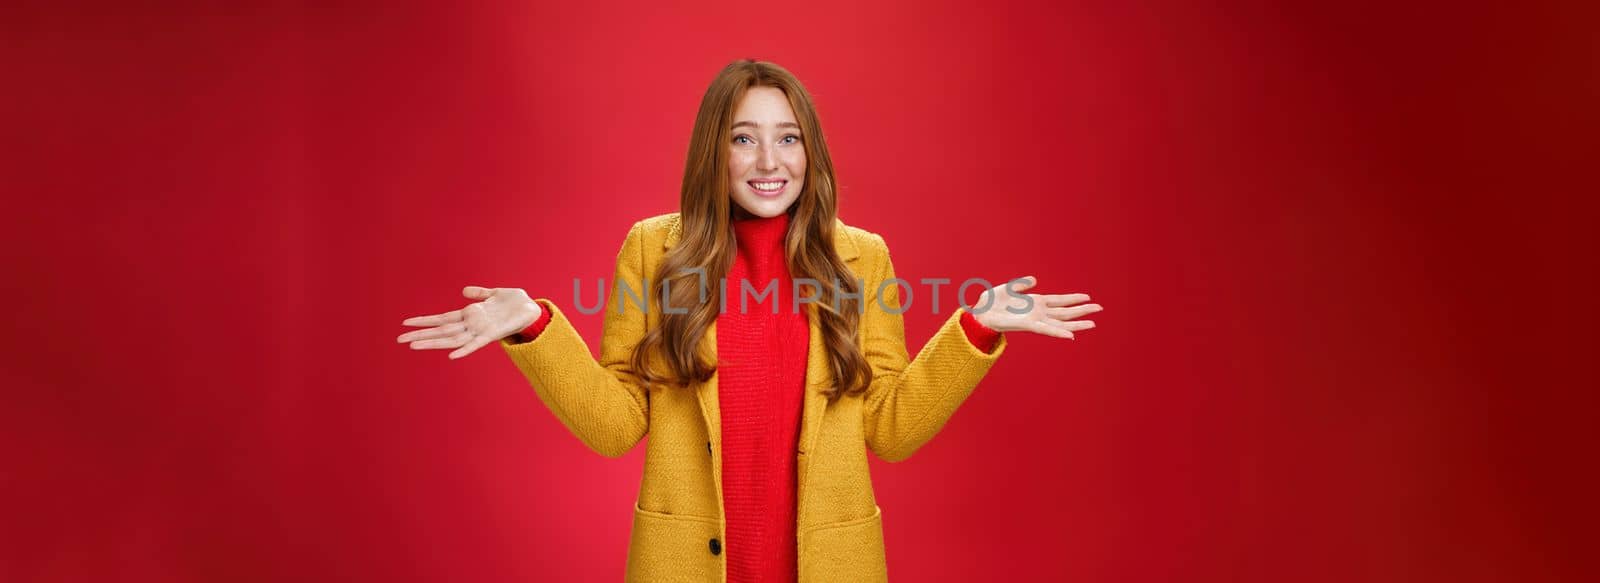 Redhead girl apologizes for being late smiling silly and guilty. with sorry look shrugging as raising hands sideways wearing stylish yellow coat over dress posing against red background.